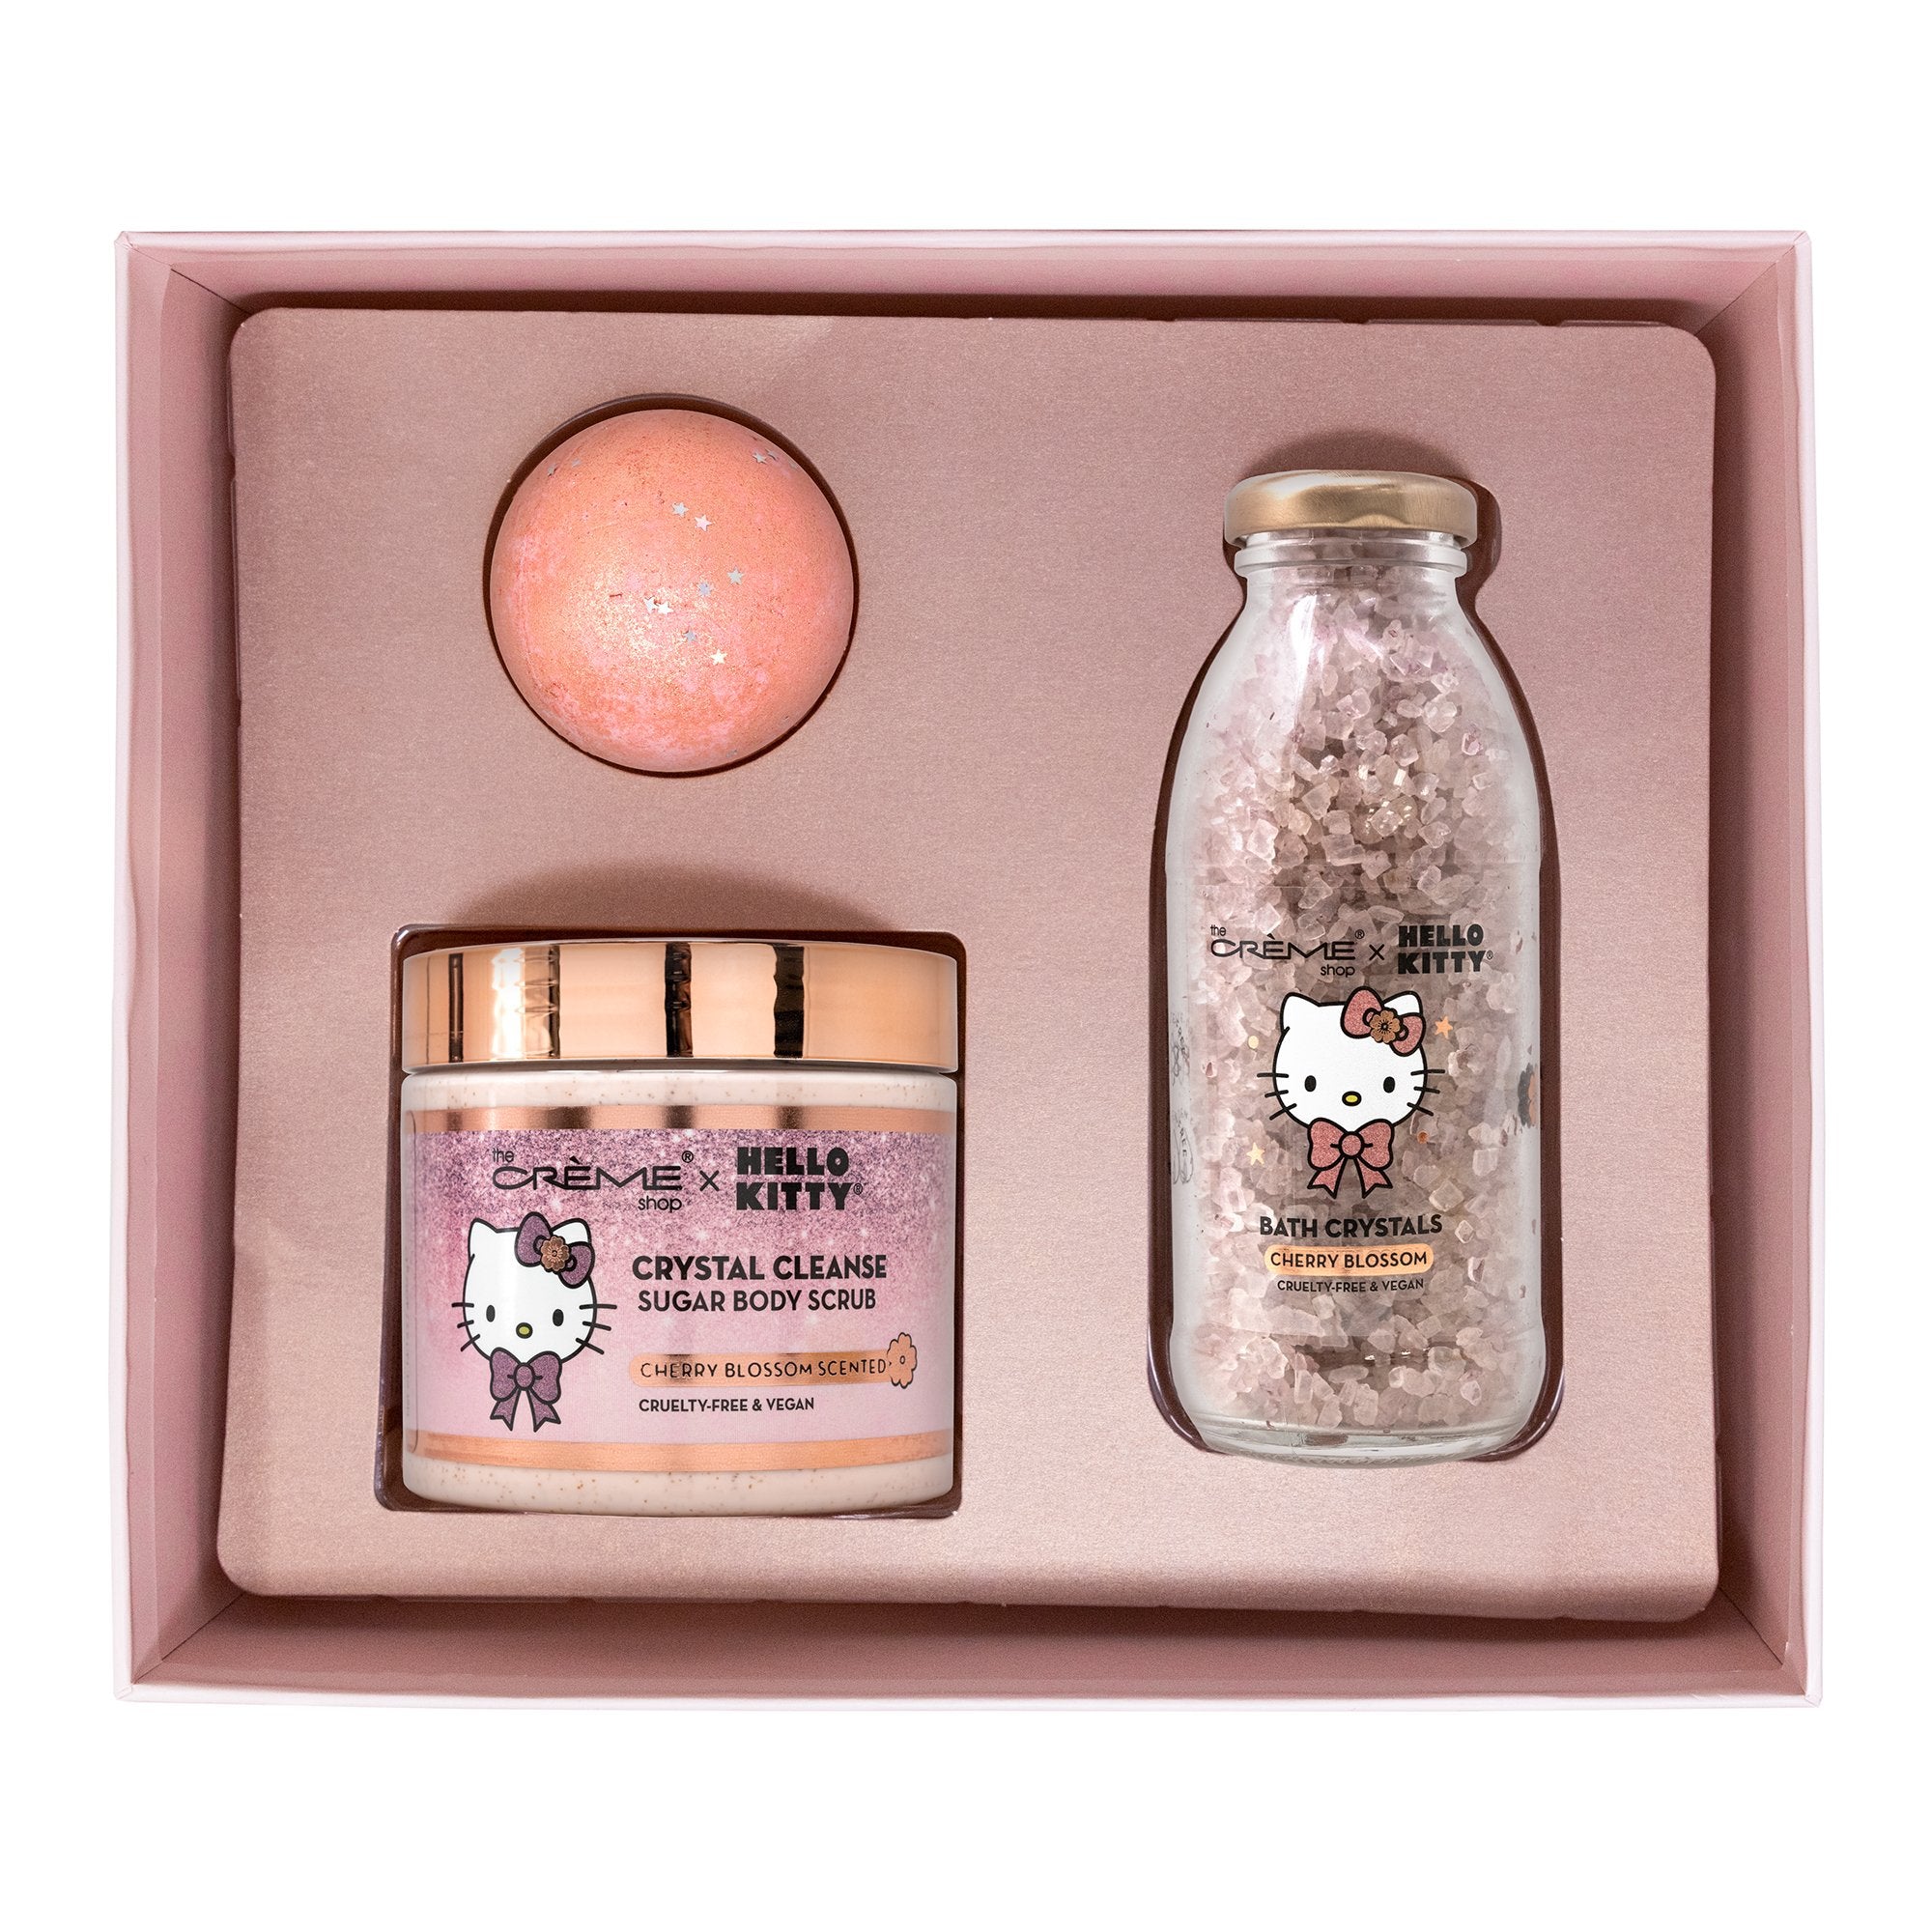 Hello Kitty Lovely Luxury Spa Set (Cherry Blossom Scented) The Crème Shop x Sanrio 